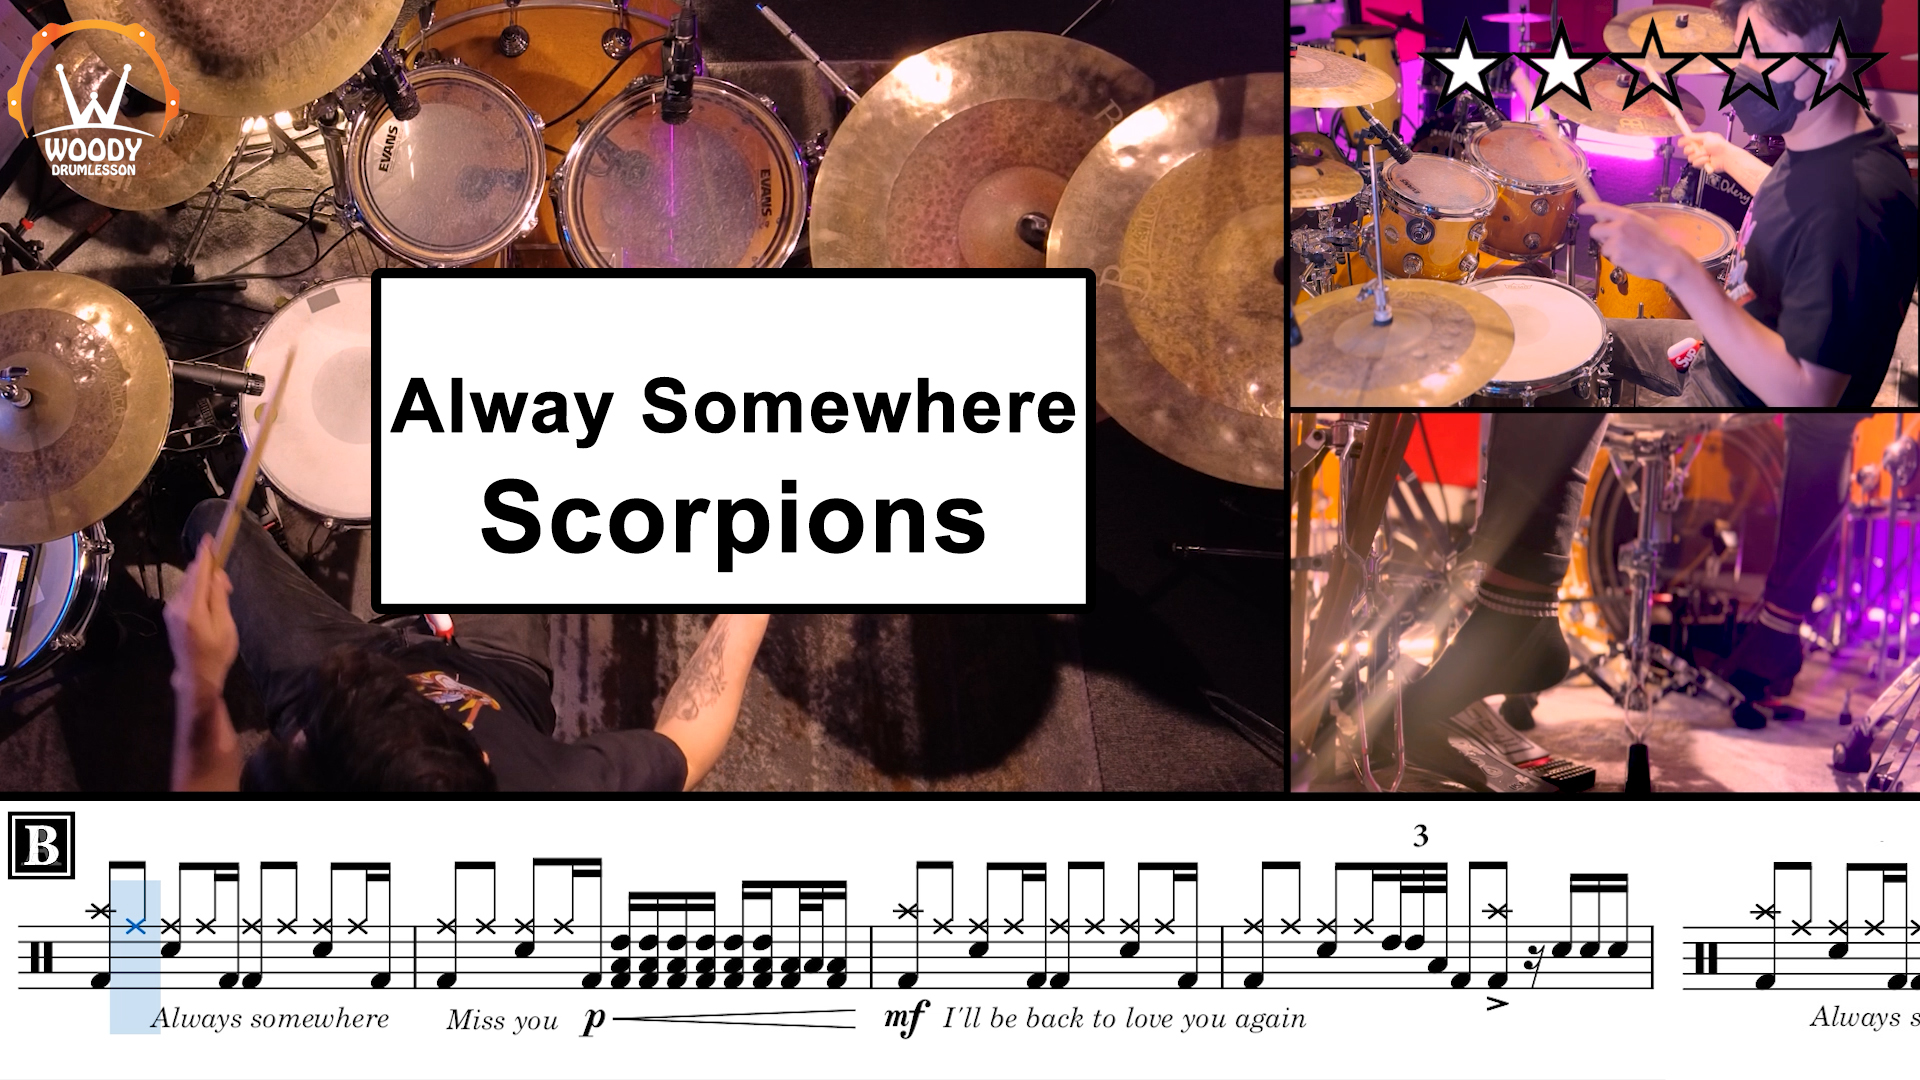 Always Somewhere - Scorpions (★★☆☆☆) Drum Cover, Score, Sheet Music, Lessons, Tutorial, DRUMSHEET